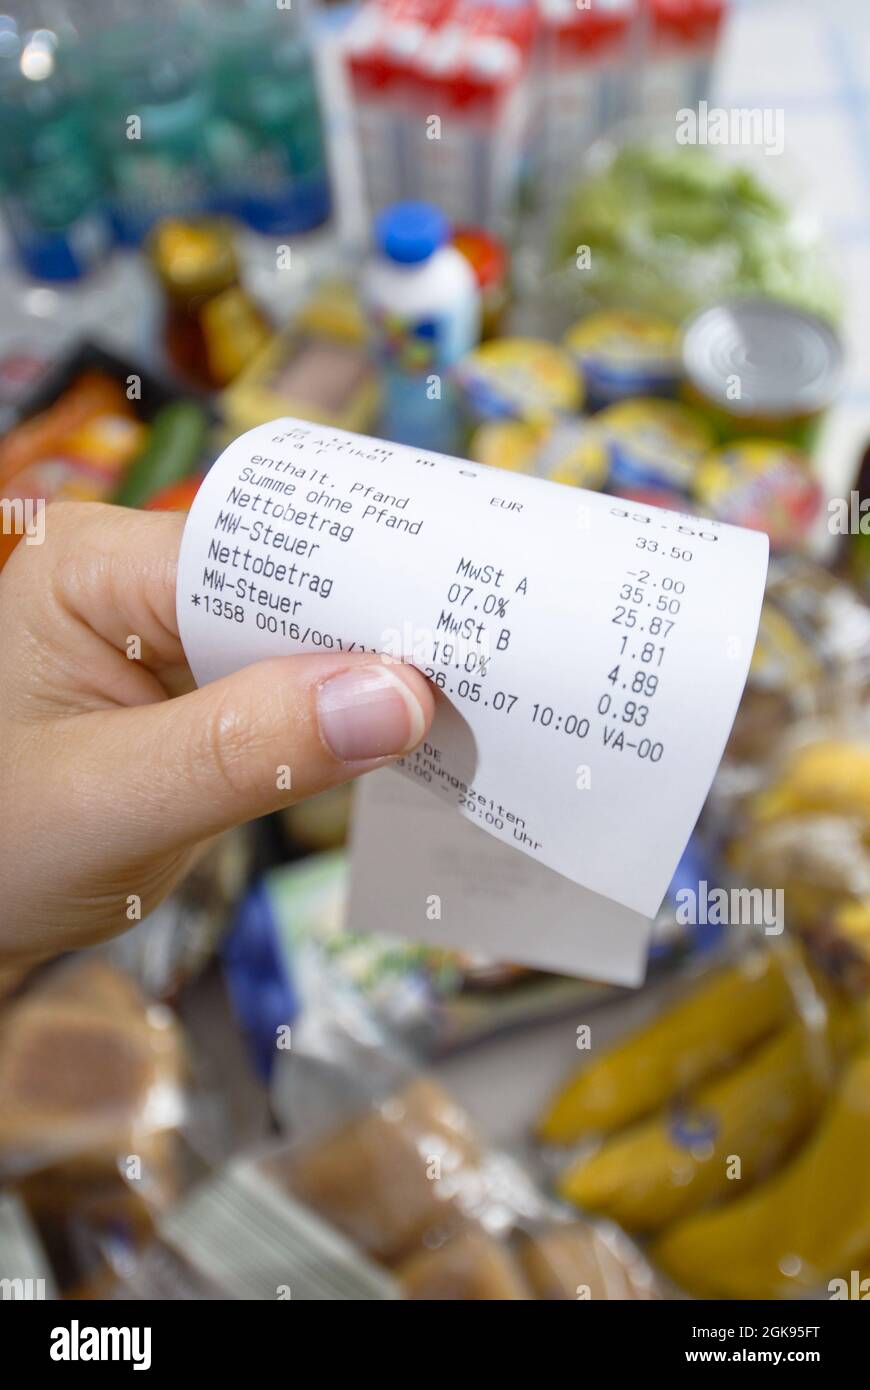 receipt in a hand, Germany Stock Photo